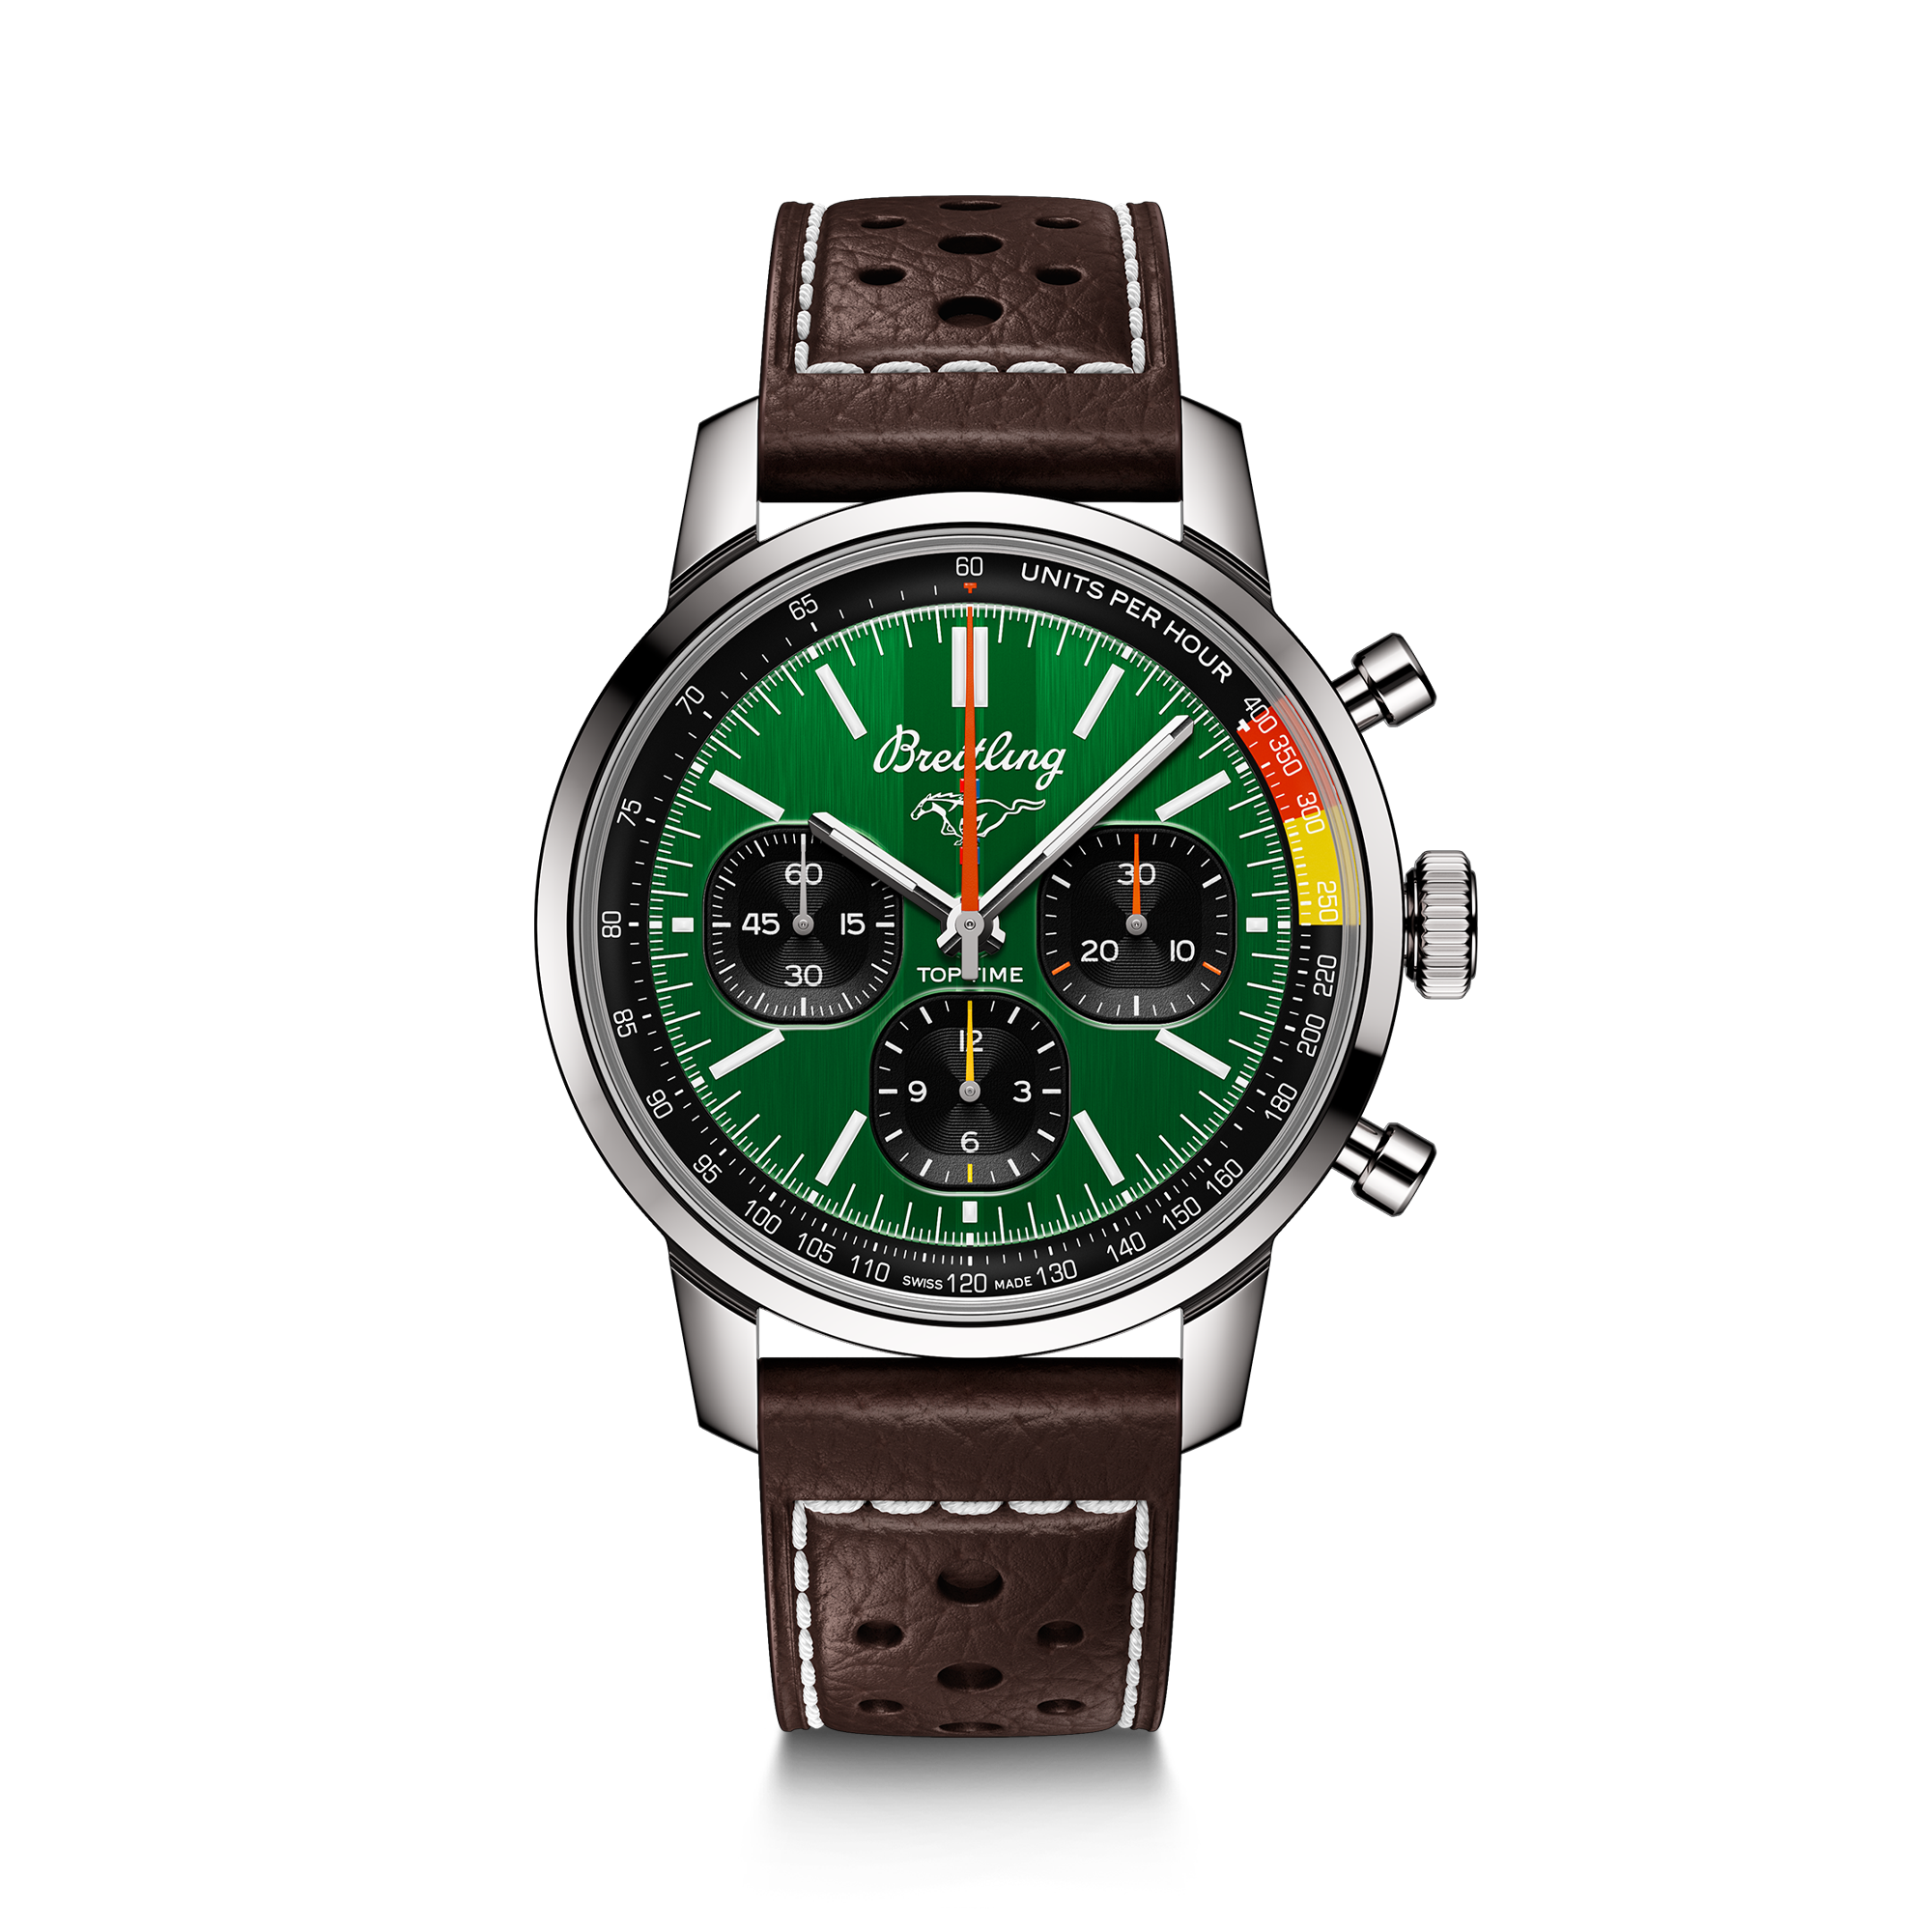 Breitling Top Time B01 Ford Mustang 41mm, Green Dial, Baton Numerals_1